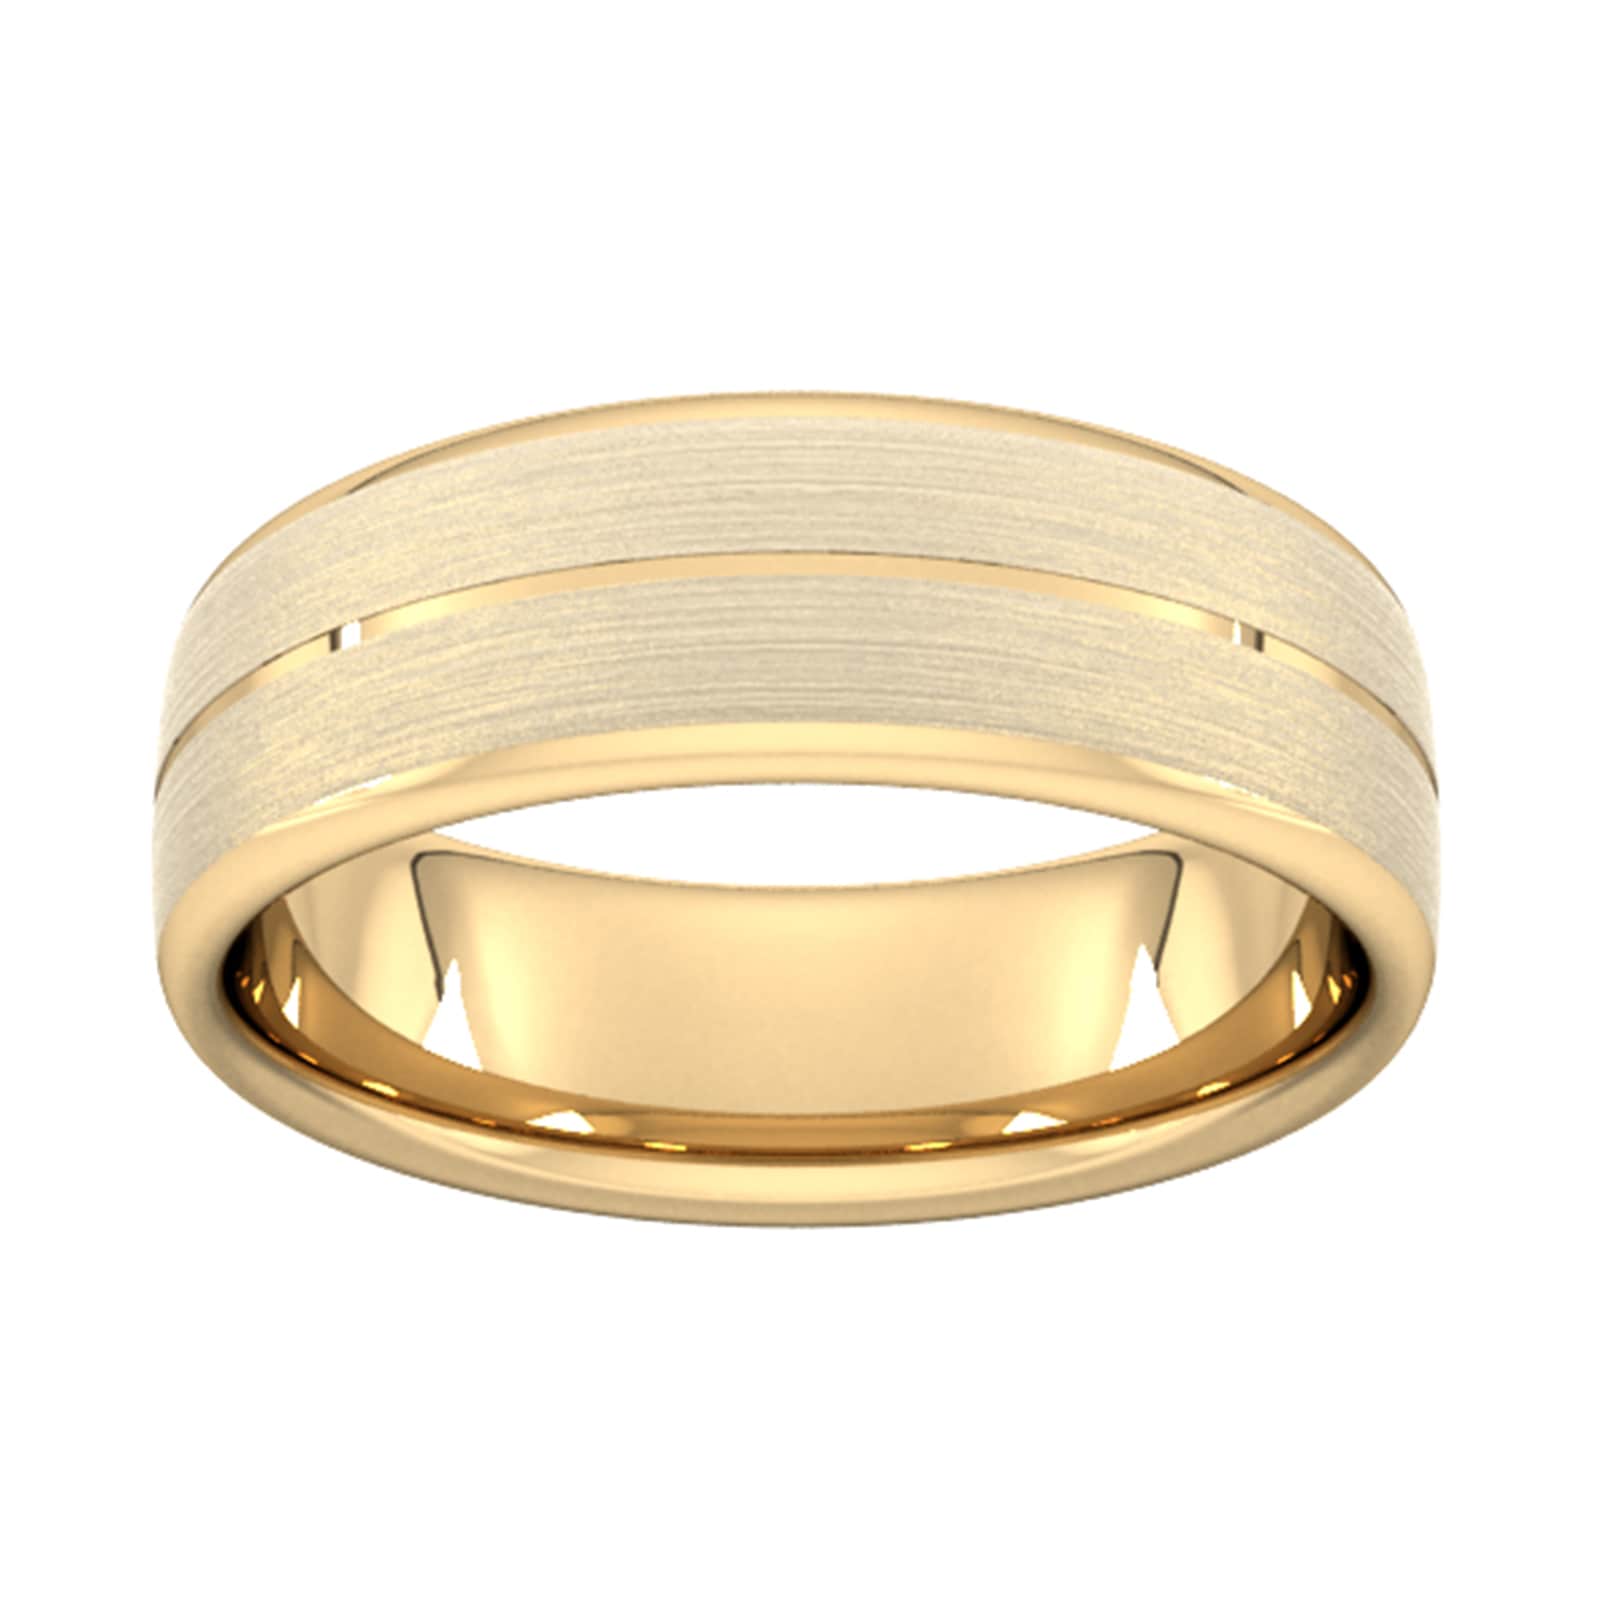 7mm Traditional Court Heavy Centre Groove With Chamfered Edge Wedding Ring In 9 Carat Yellow Gold - Ring Size V